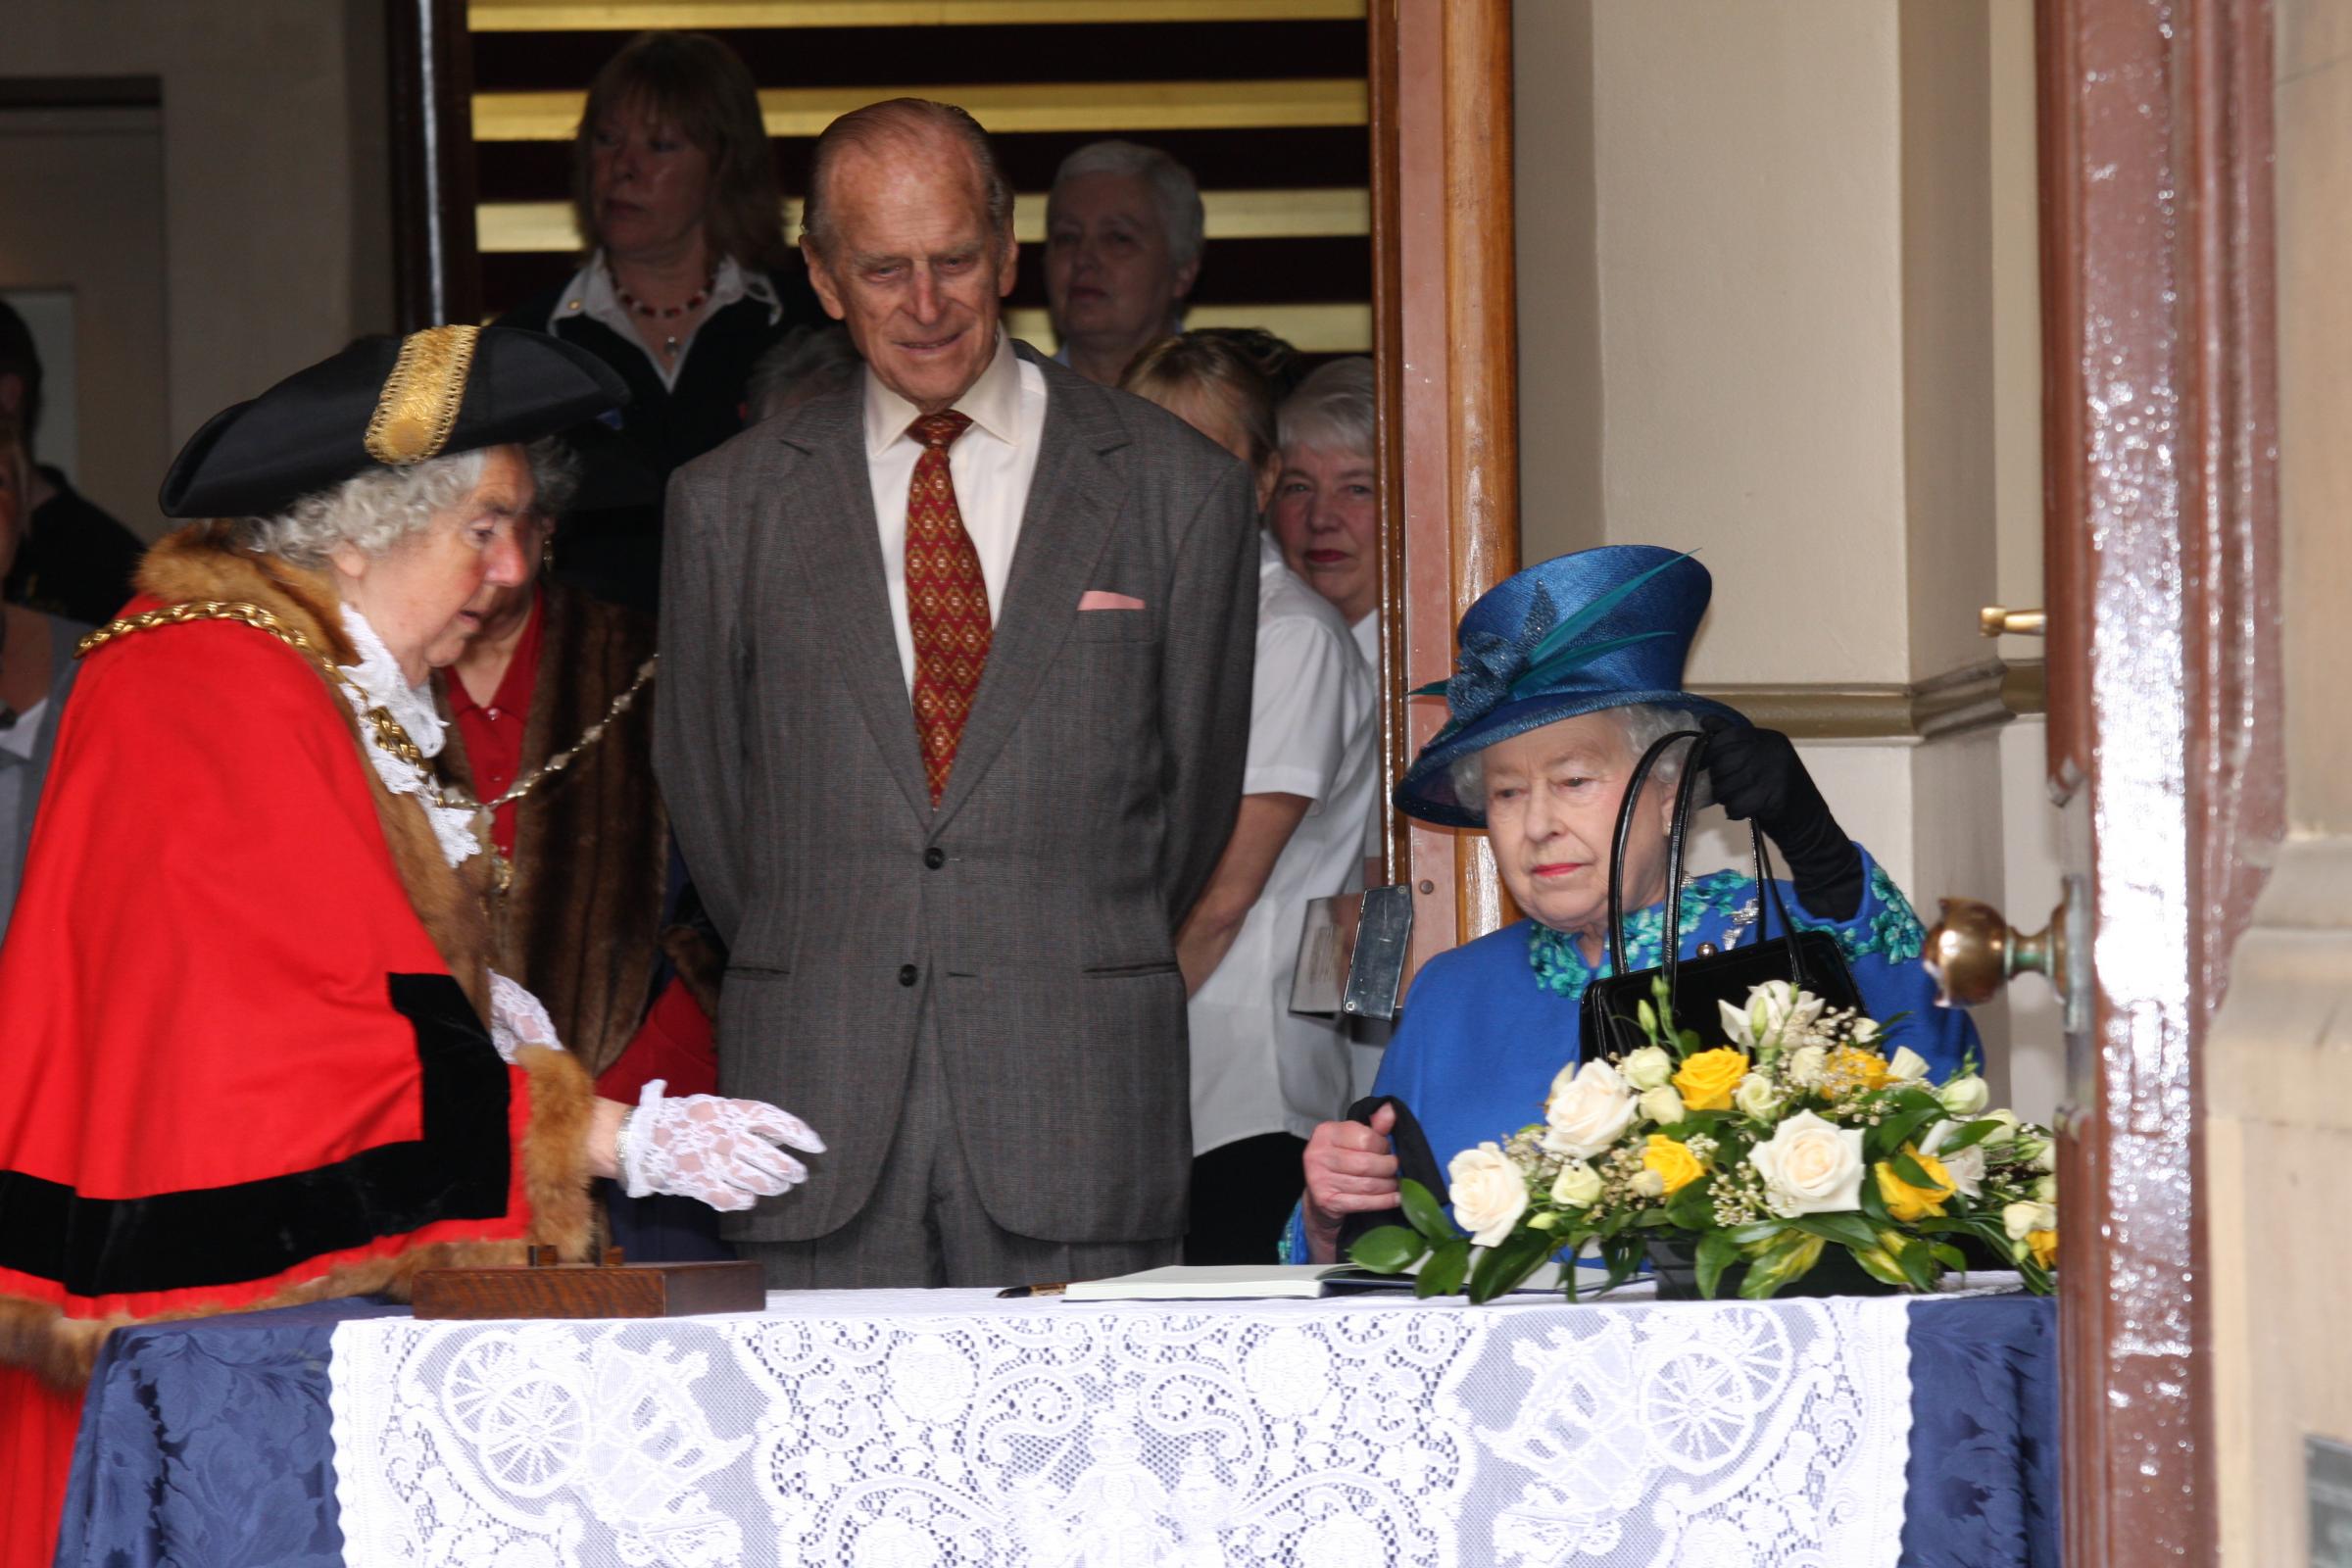 Prince phillip and queen elizabeth visit to welshpool 2010